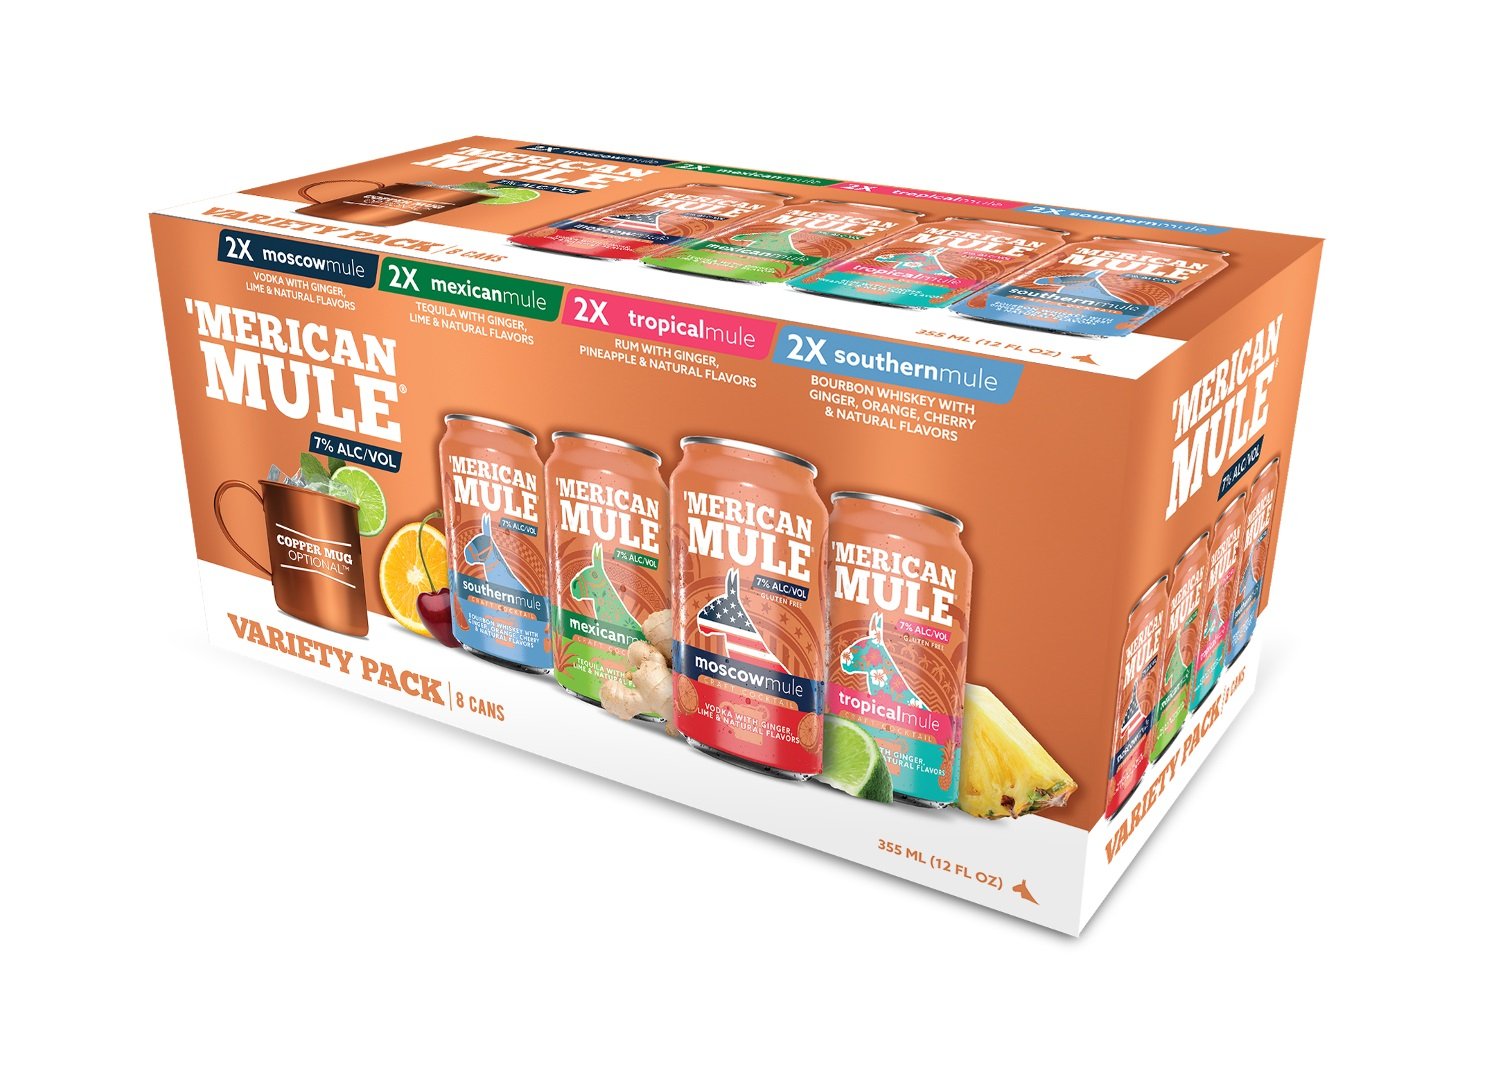 20-merican-mule-nutrition-facts